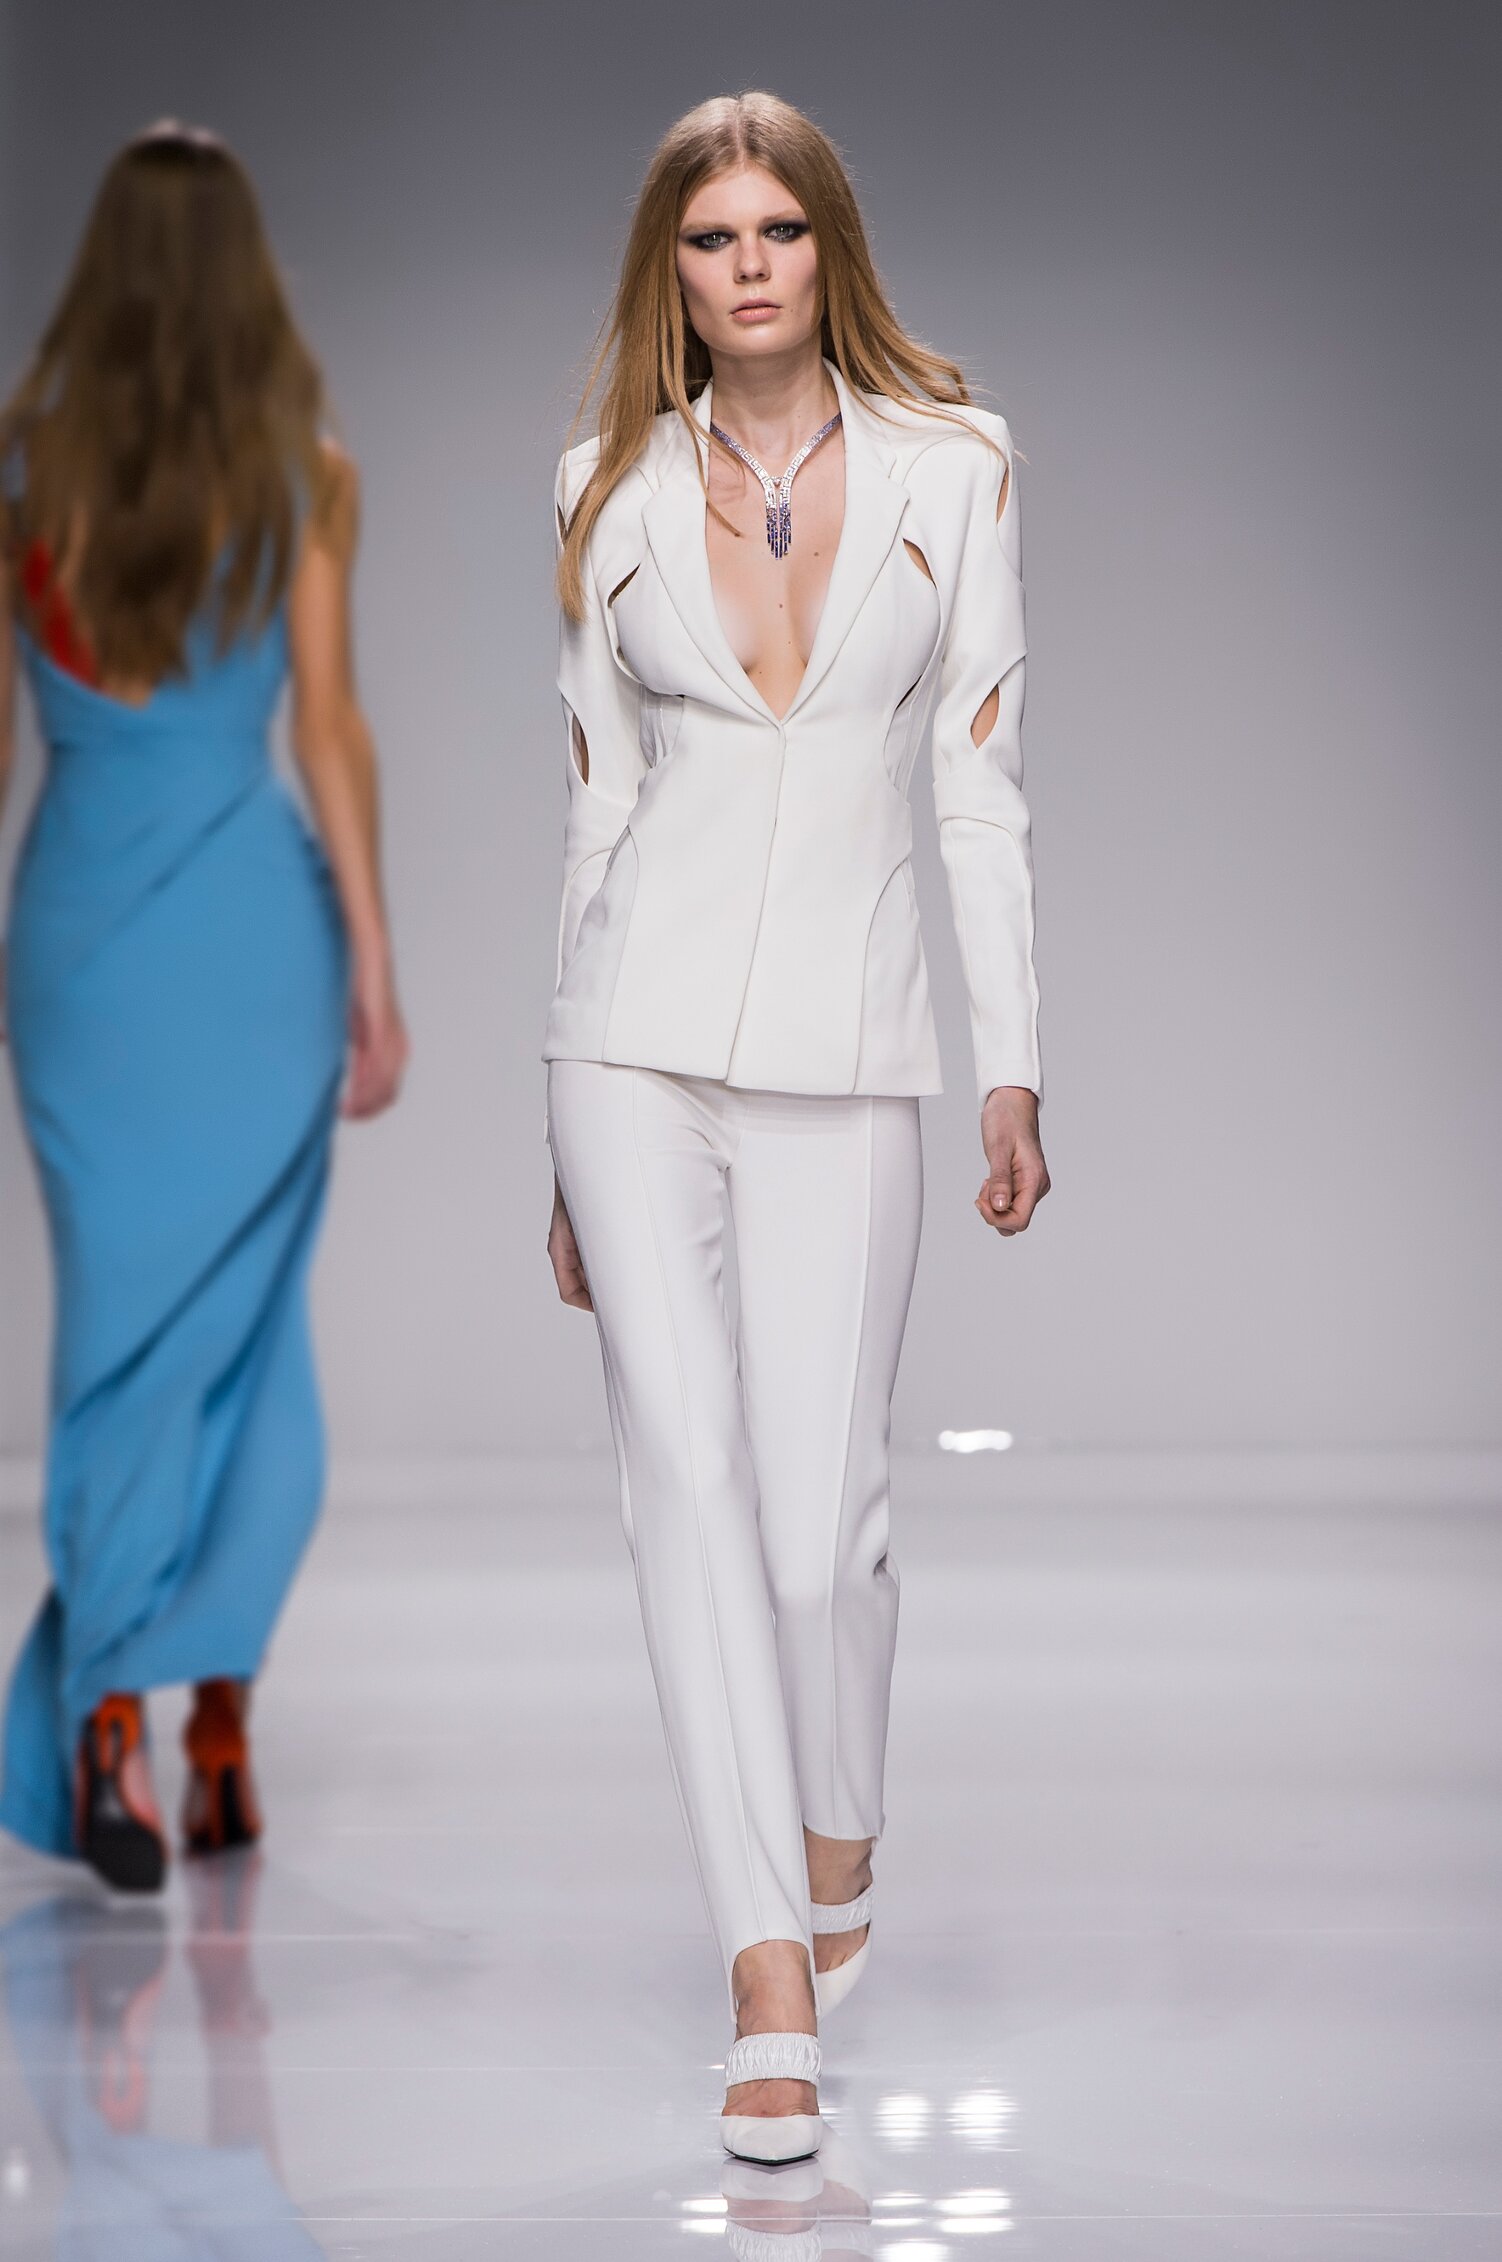 Atelier Versace Couture Spring Summer 2016 Womens Collection Paris Fashion Week